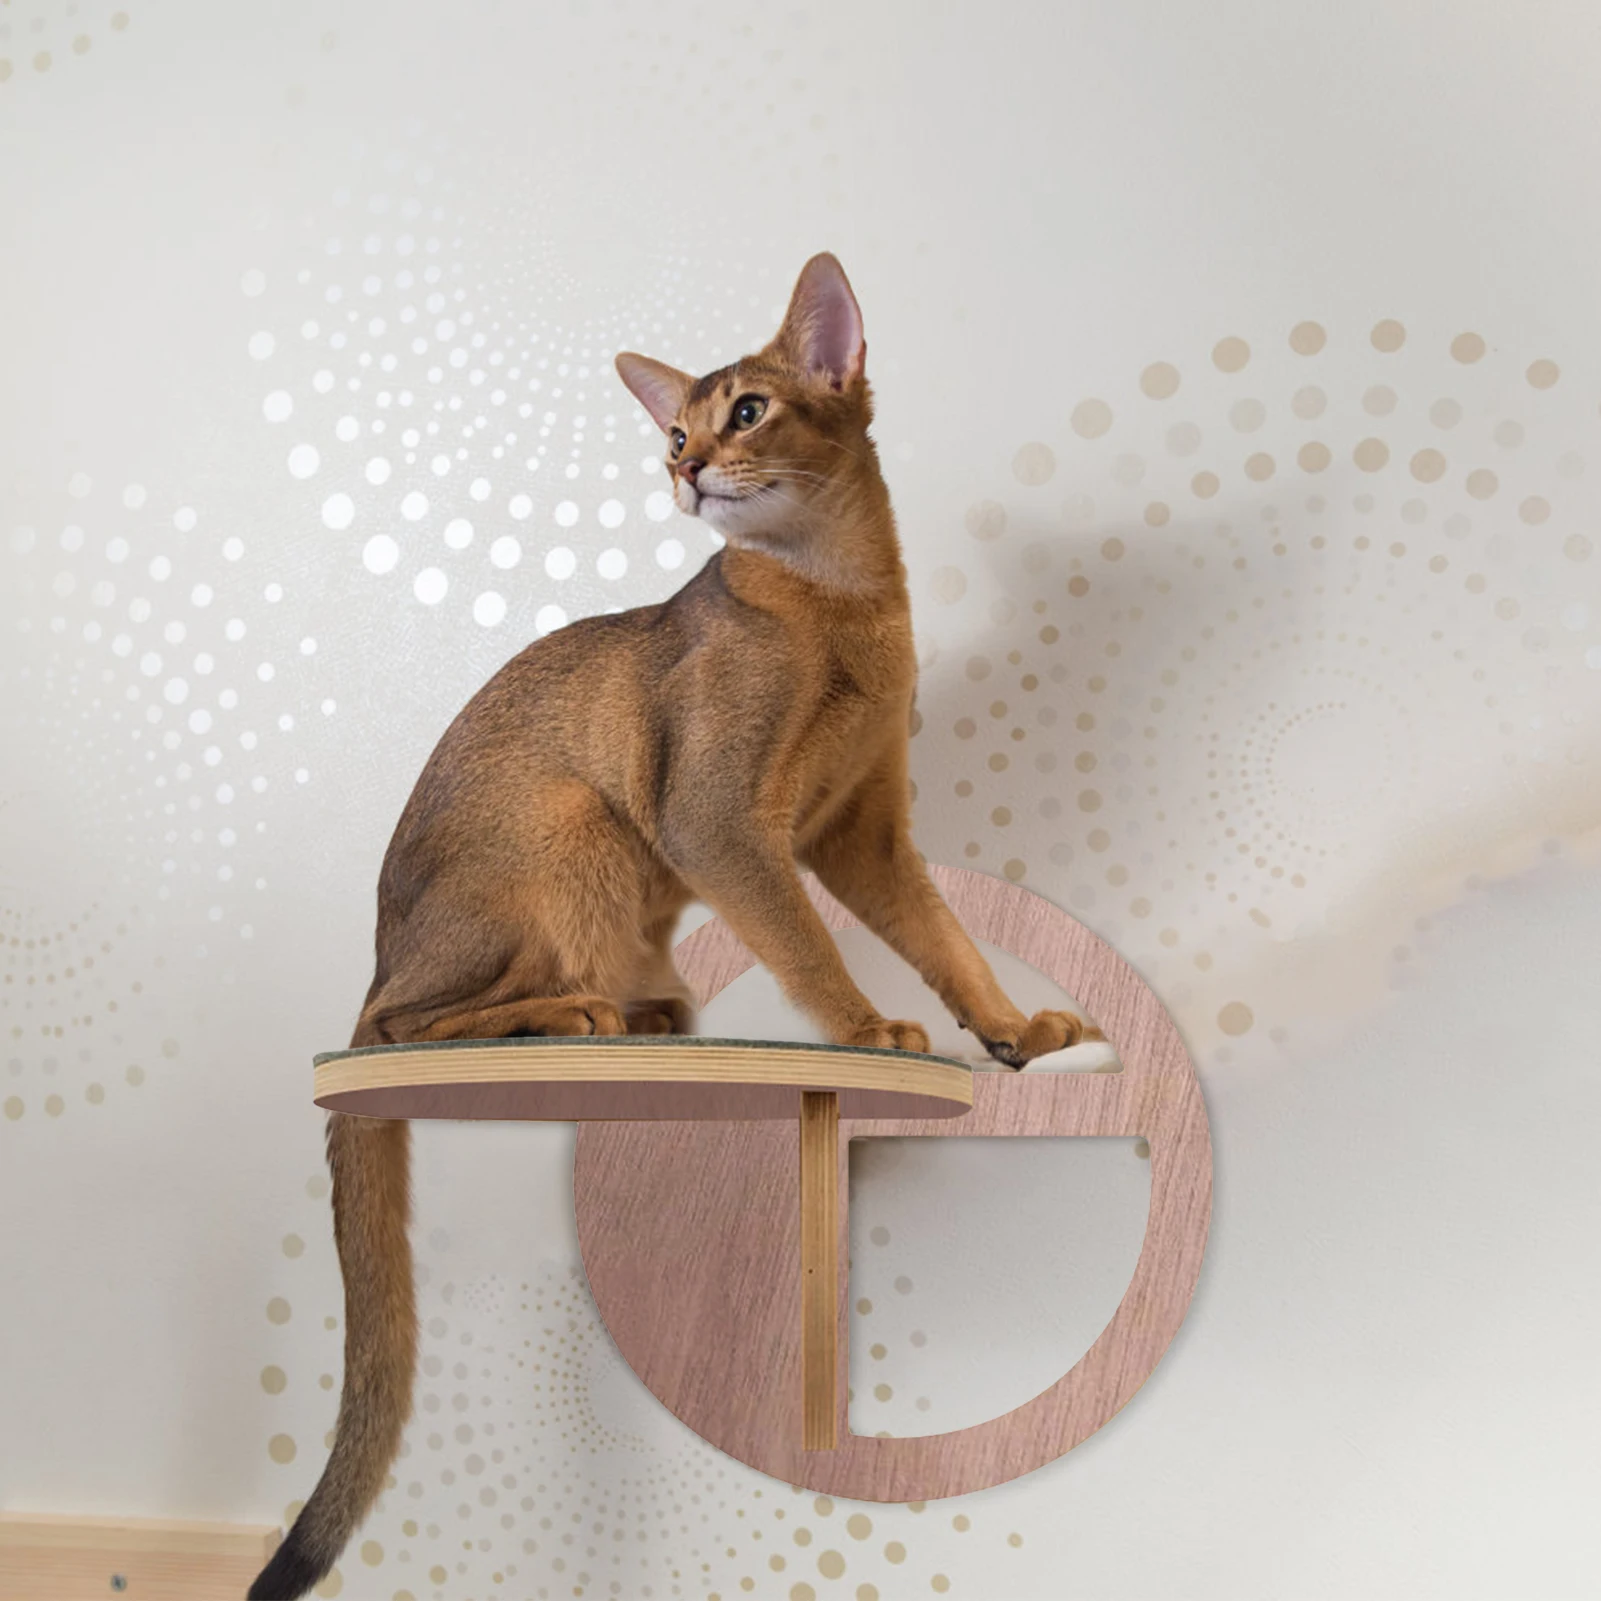 

Wall Mounted Cat ShelfCat Shelves And Perches For Wall Kitten Climbing And Jumping Board Wall Furniture For Playing Lounging